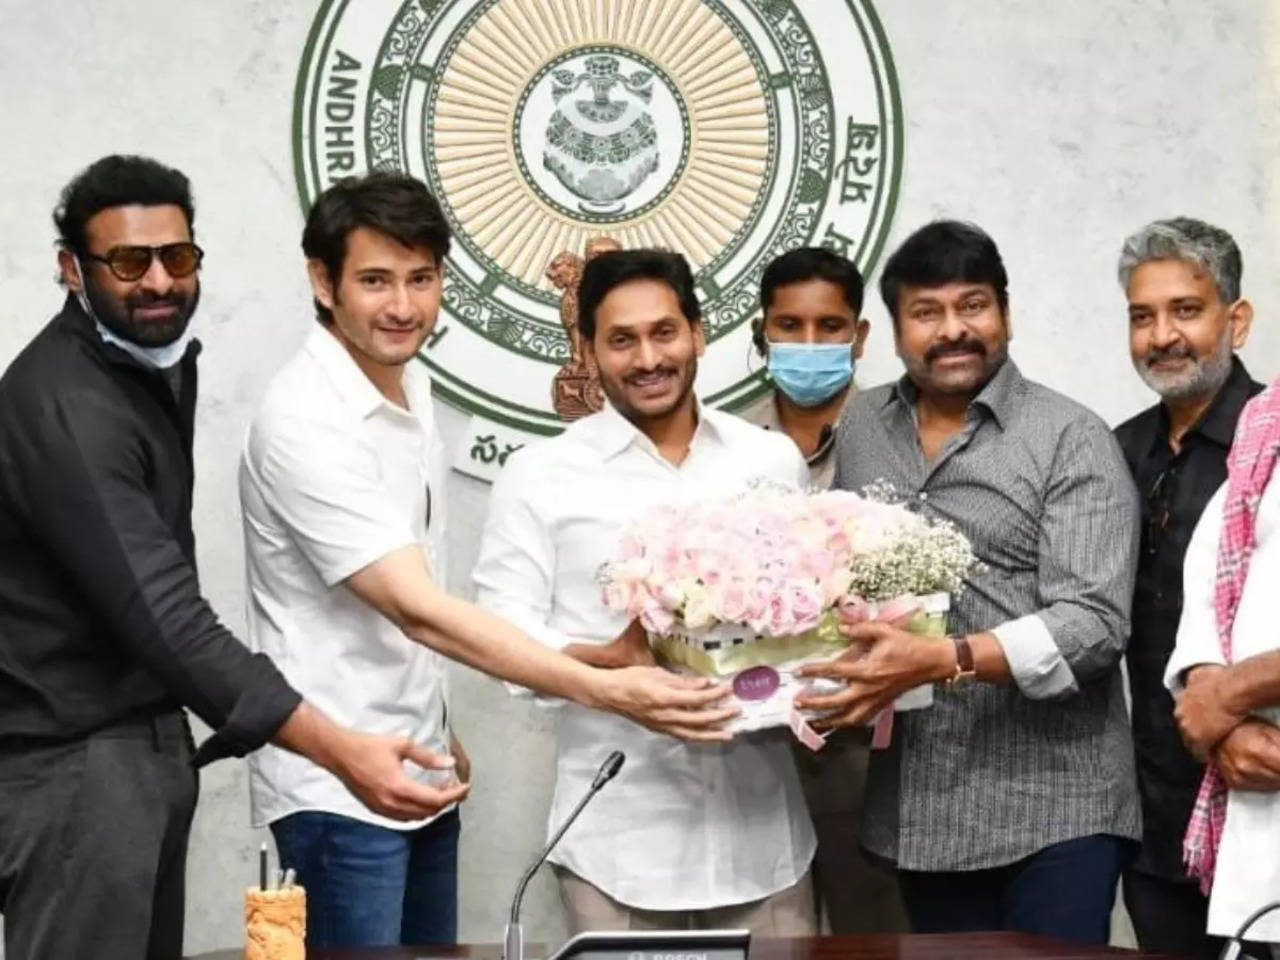 EC asks Jagan Reddy's YSRCP to clear air on permanent post of president |  Latest News India - Hindustan Times